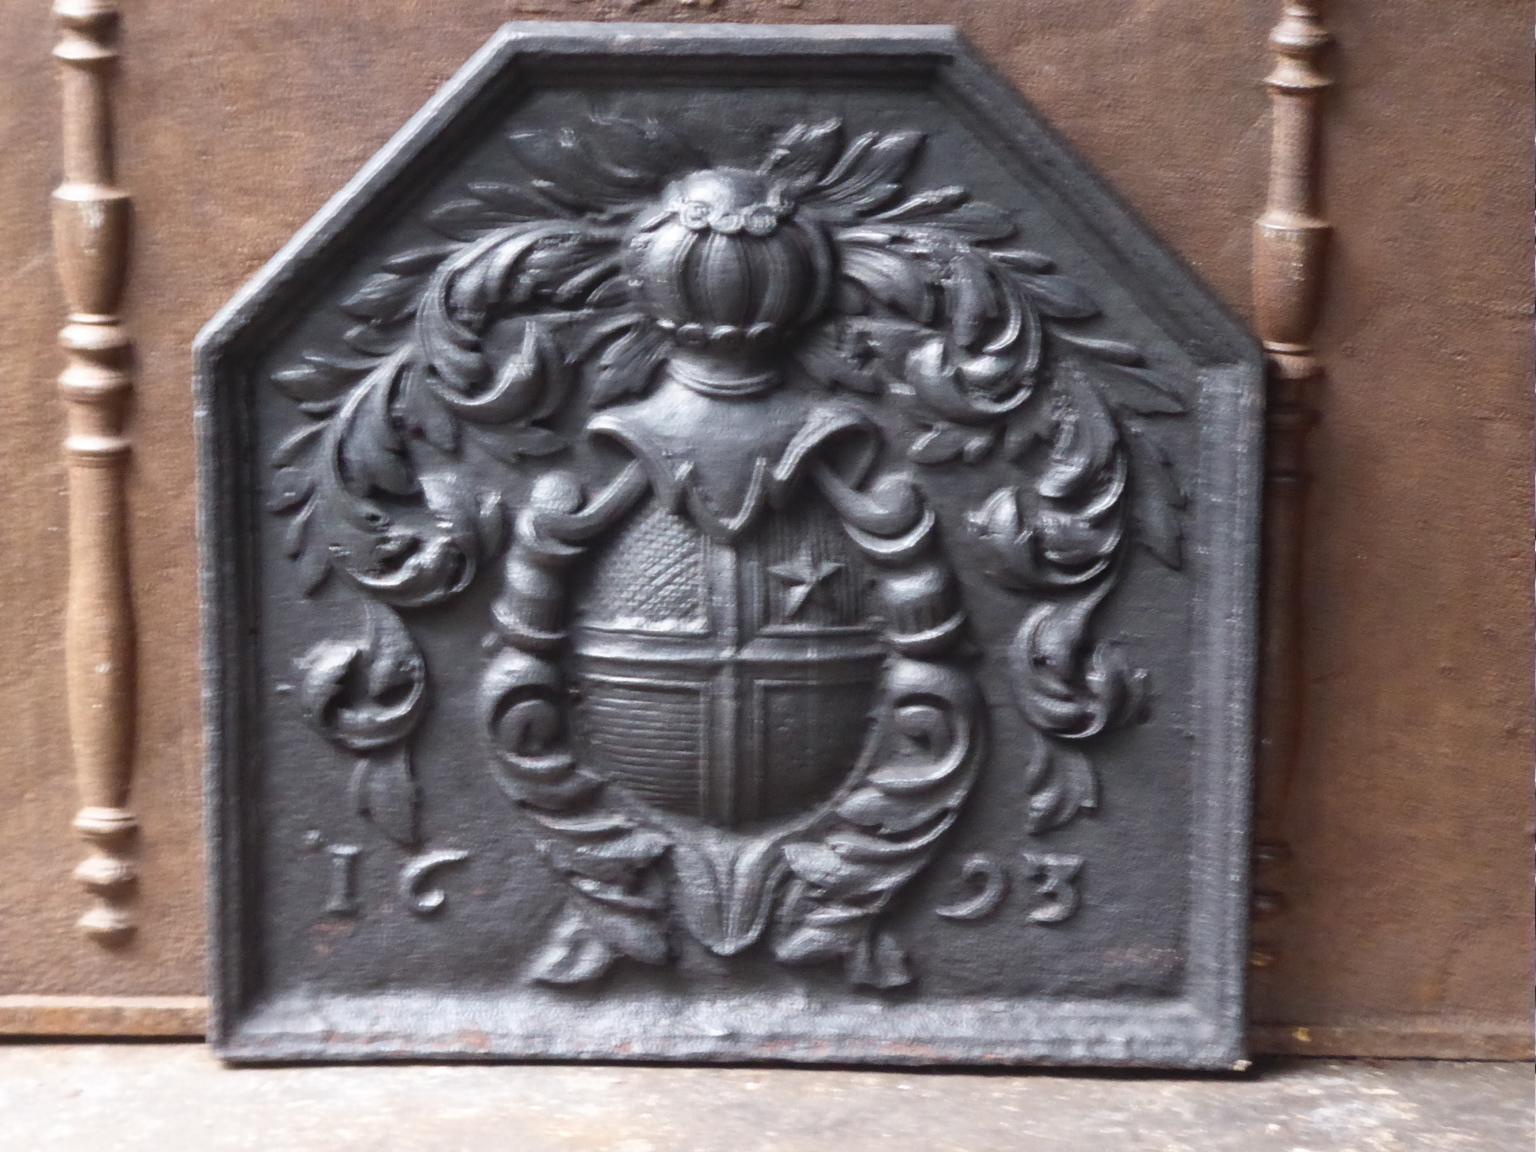 17th century French Louis XIV fireback with an unknown coat of arms. The fireback is made of cast iron and has black / pewter patina. It is in a good condition, especially considering its age.

This product weighs more than 65 kg / 143 lbs. All our